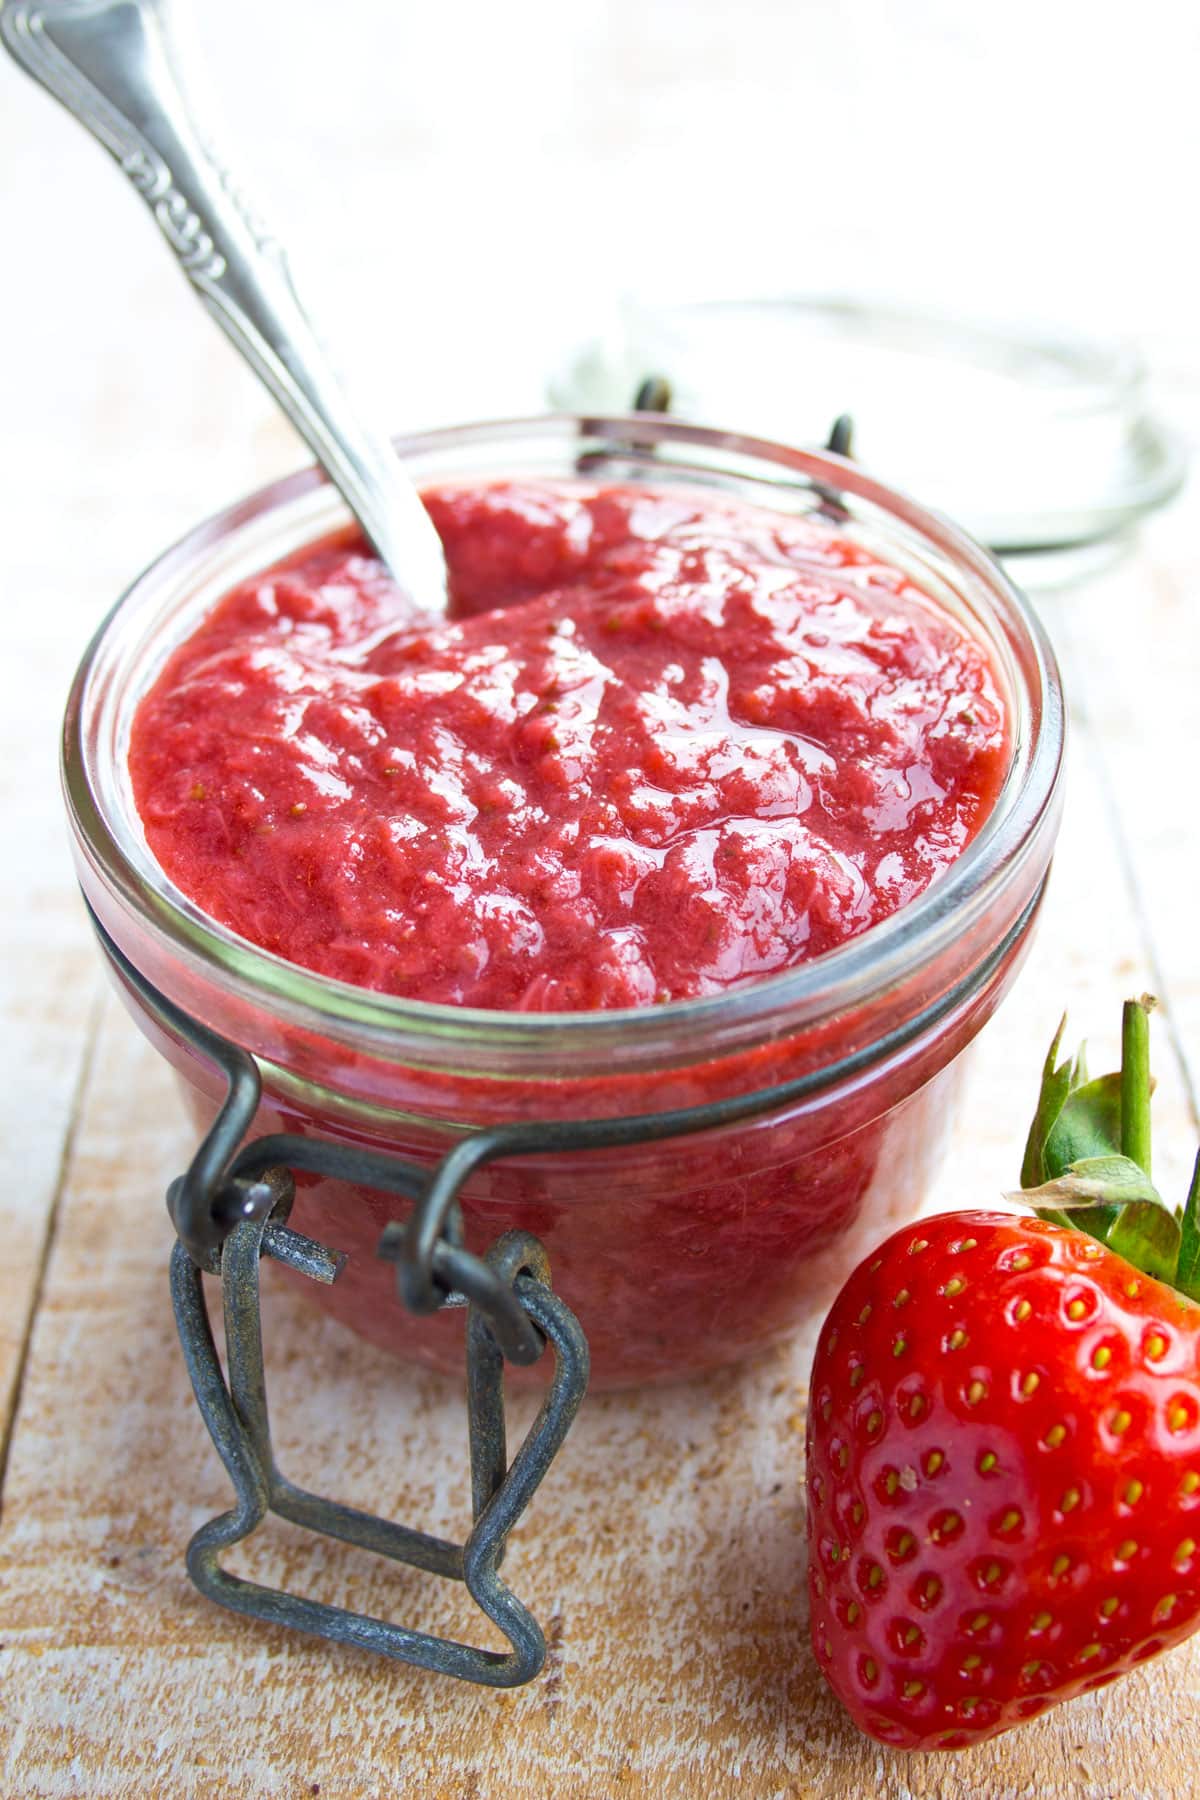 Sugar free strawberry jam in a jar with a spoon and a strawberry.